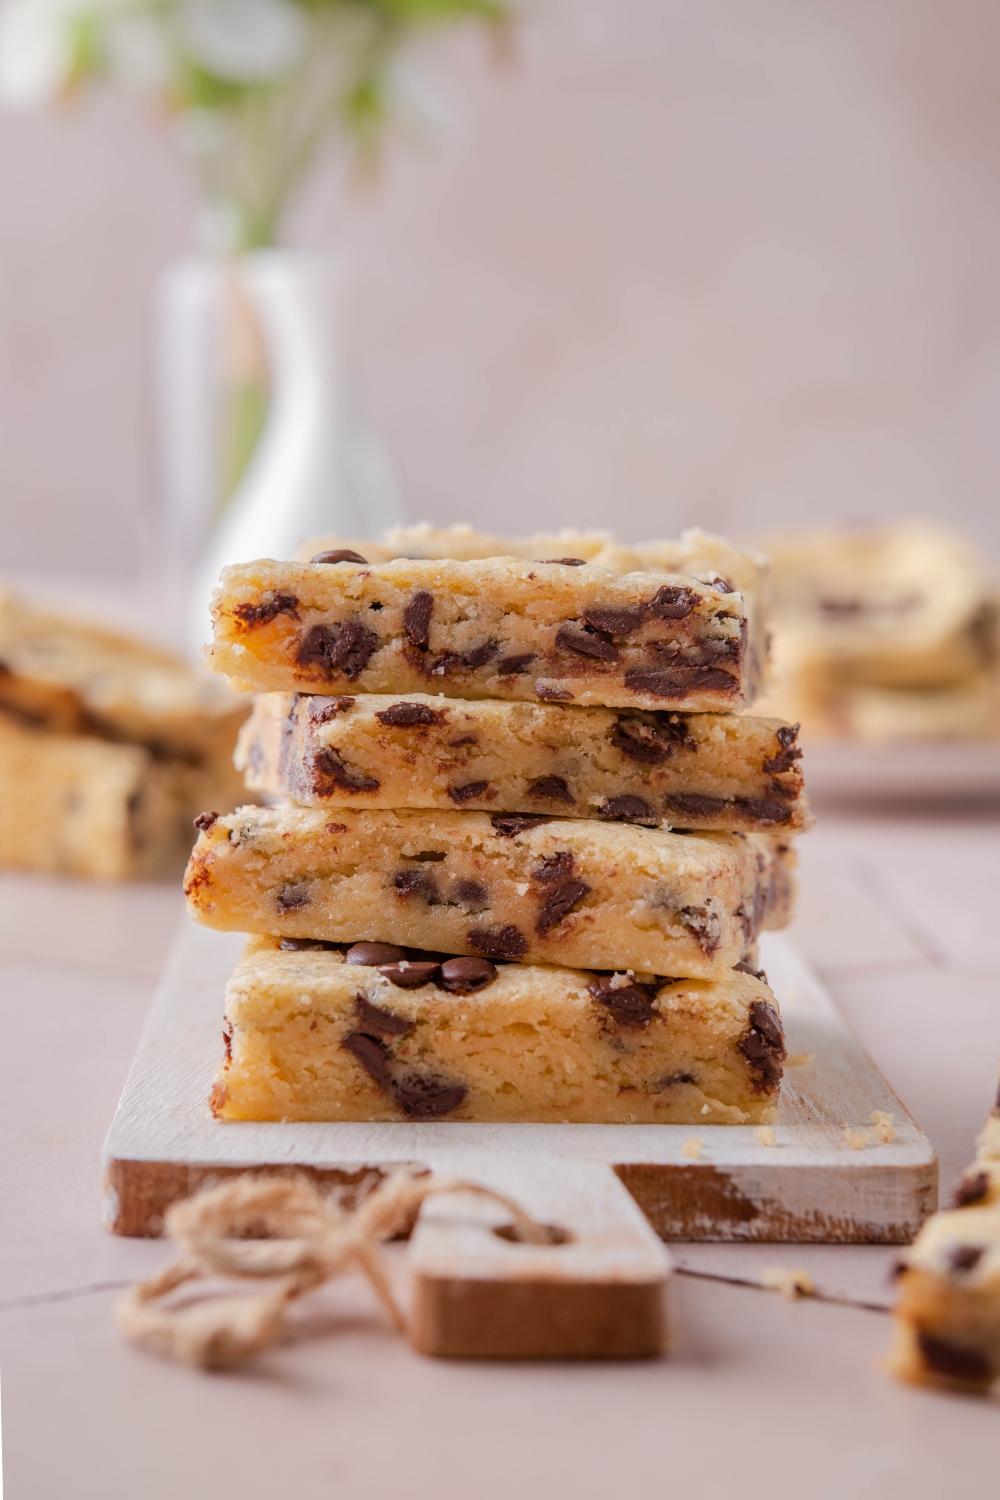 A stack of chocolate chip cookie bars on a wooden serving board.